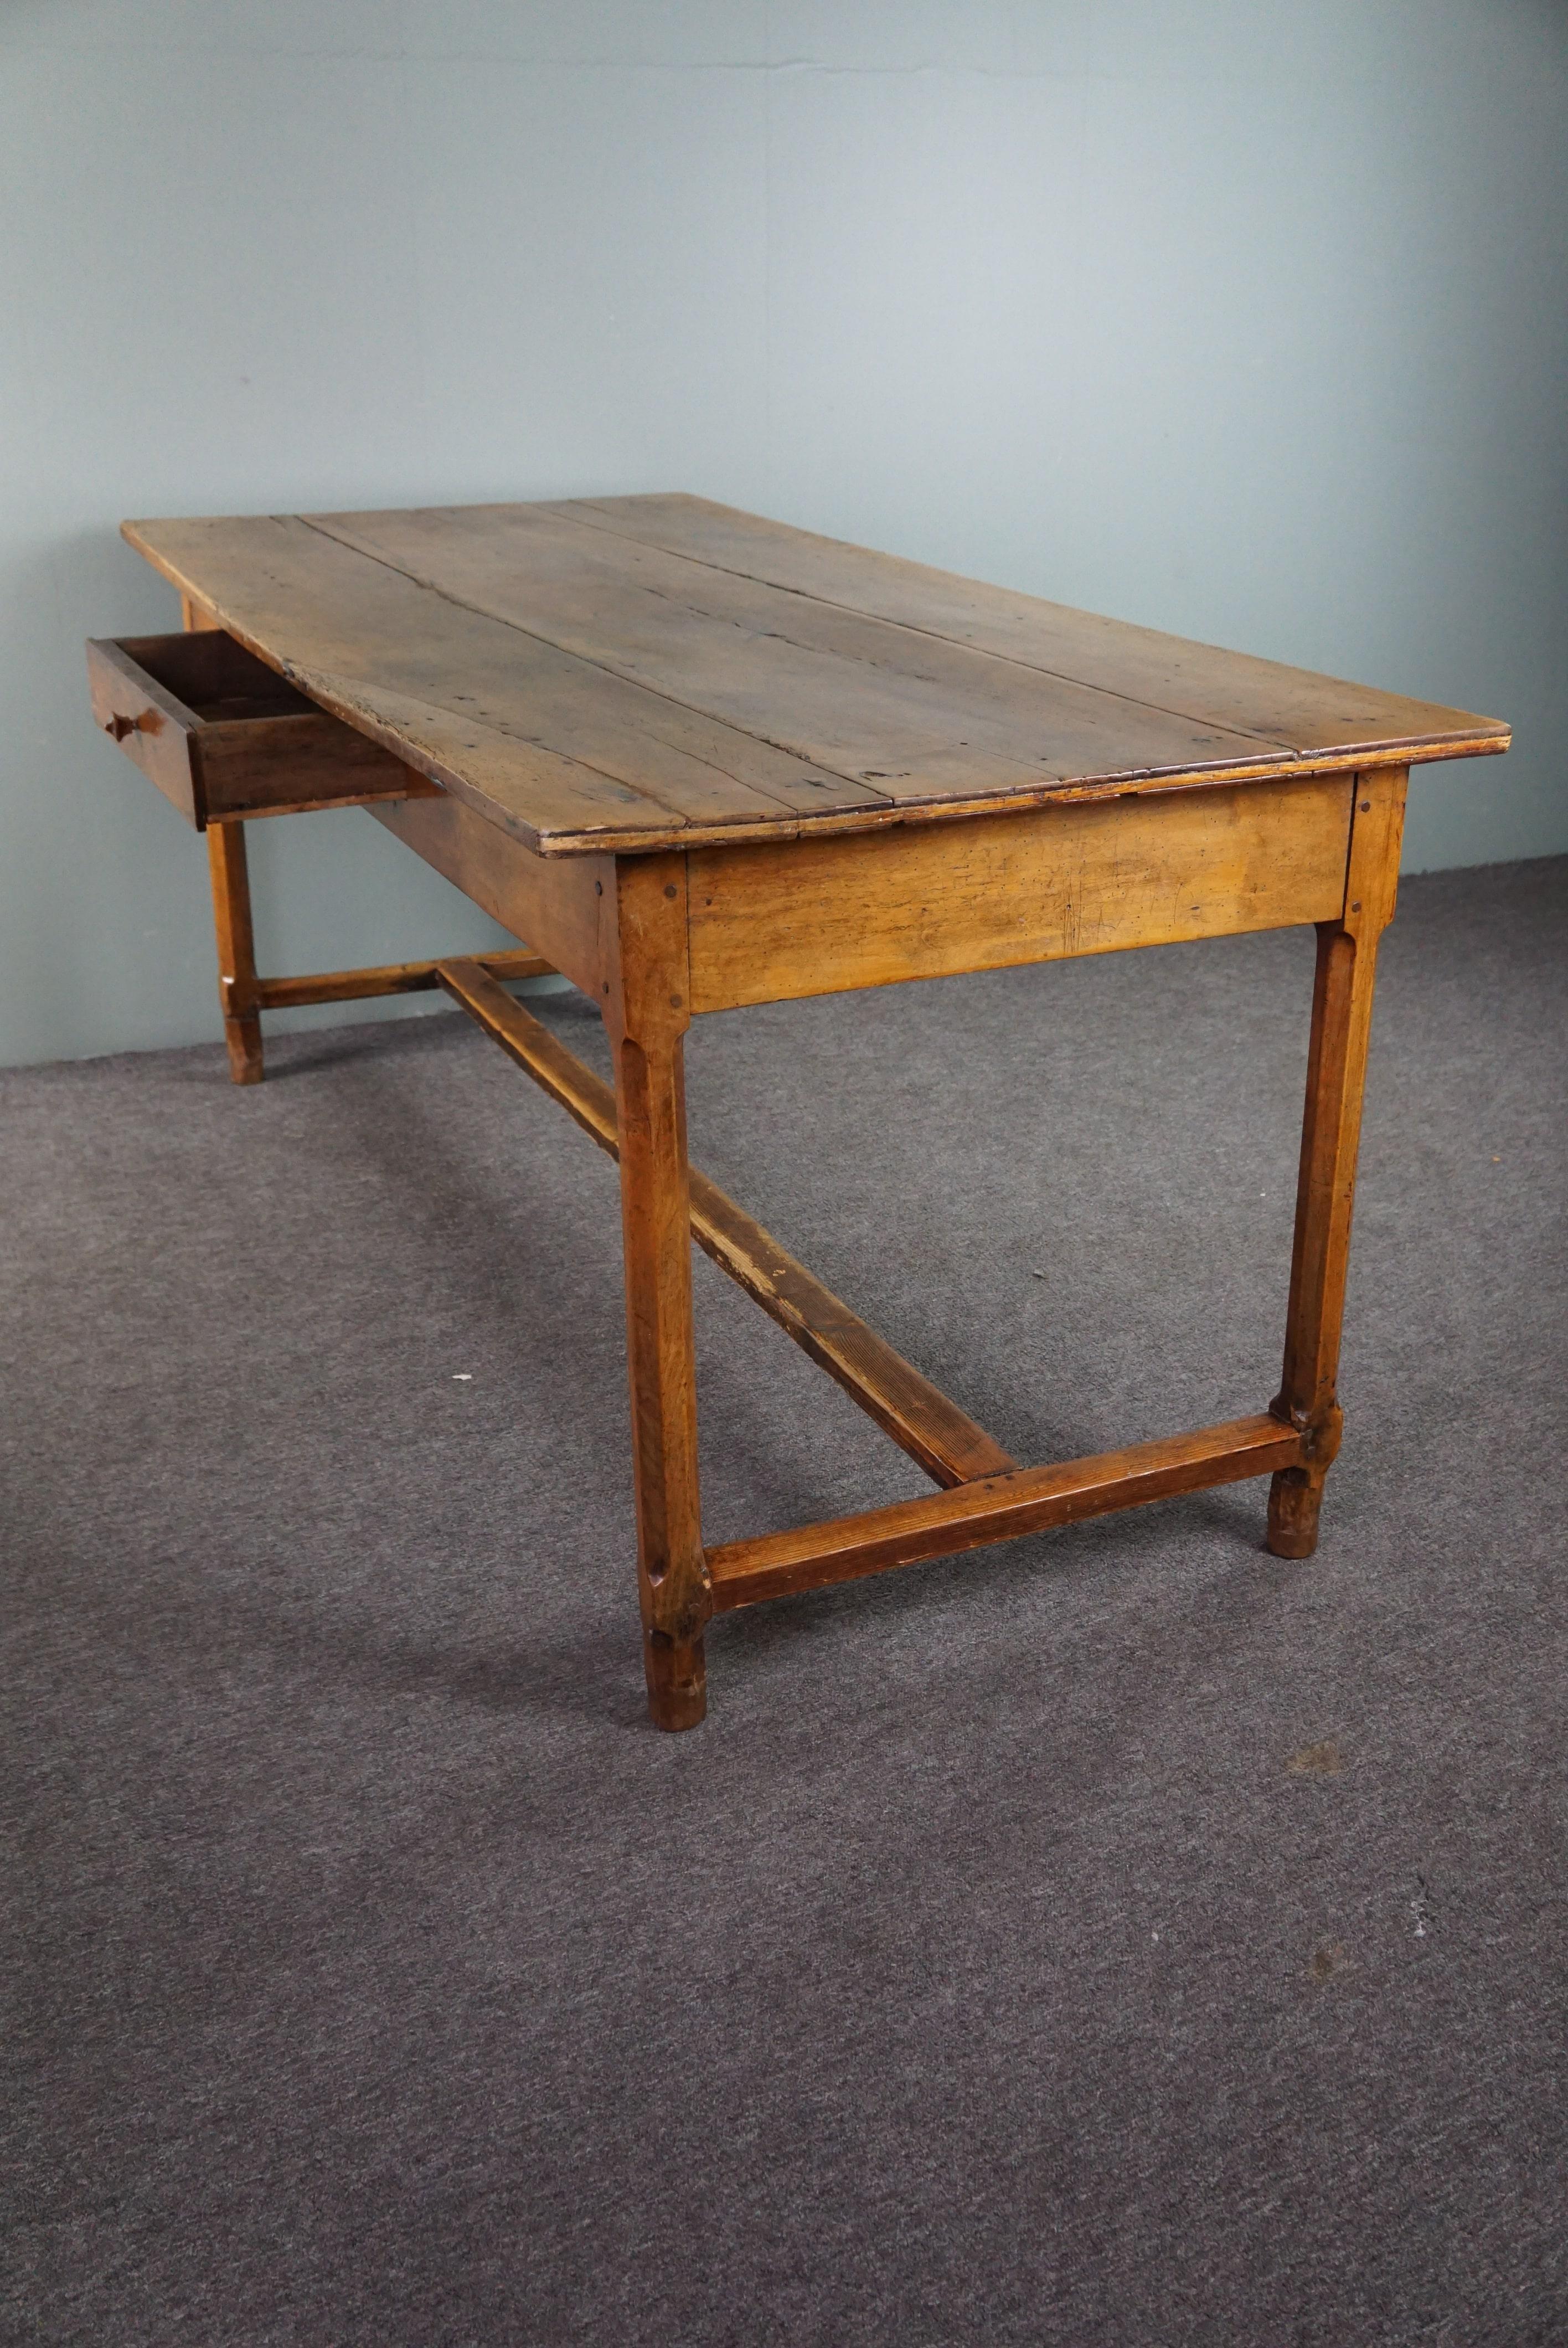 Offered by Thijs, this very nice light antique French dining table with drawer from the late 18th century. We offer this nice dining table in a light color with a drawer. The table has a beautiful patina and with its practical size can be placed in